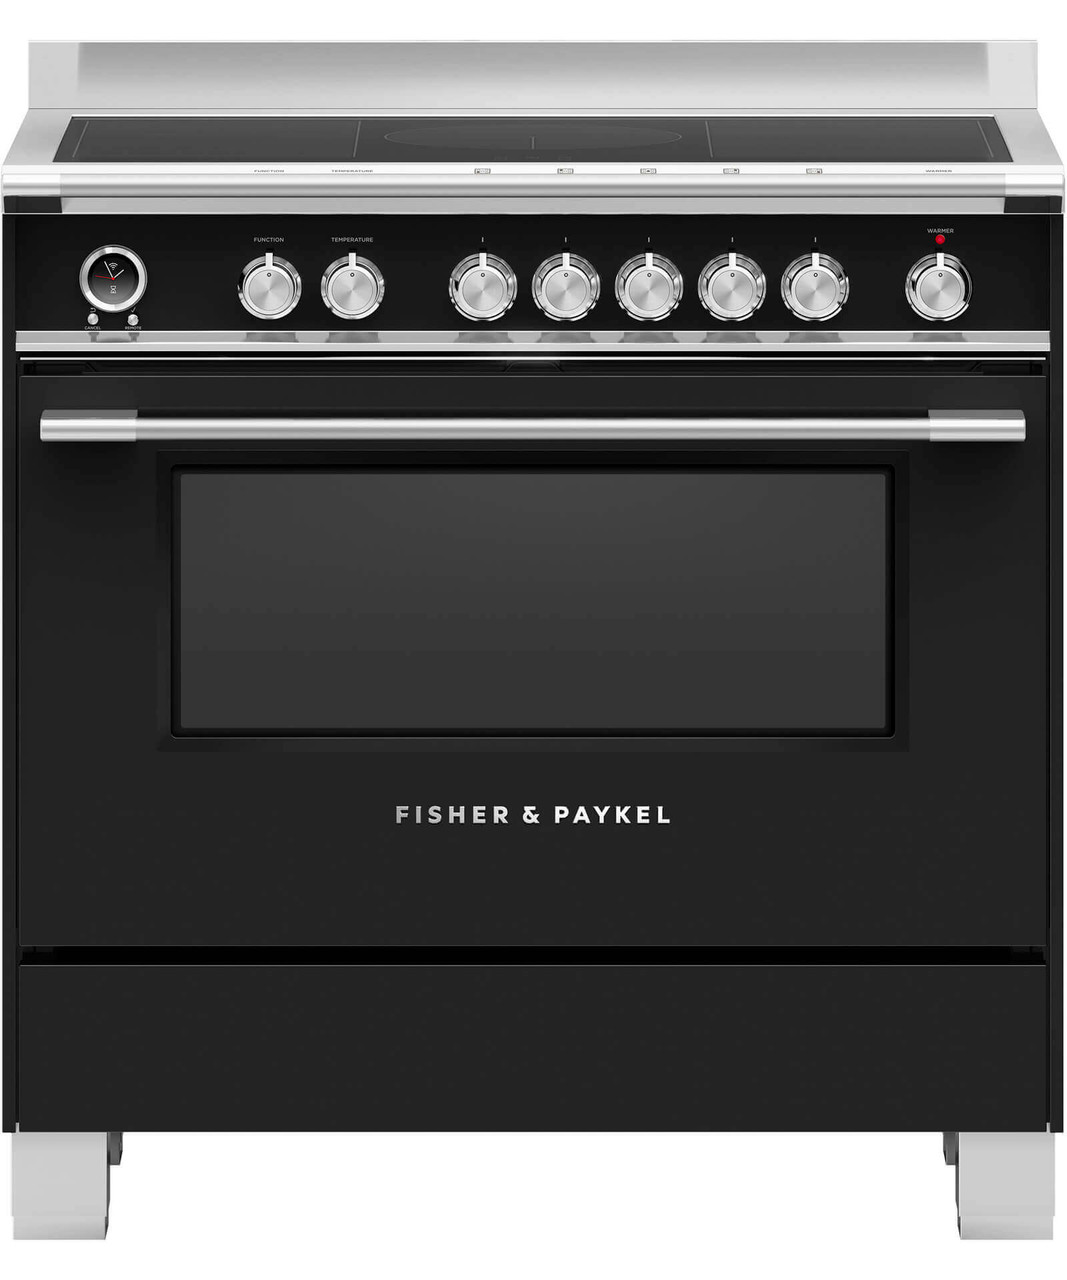 OR90SCI6B1 - 90cm Classic Style Freestanding Cooker, 4 Zone Induction, Pyrolytic Cleaning - Black